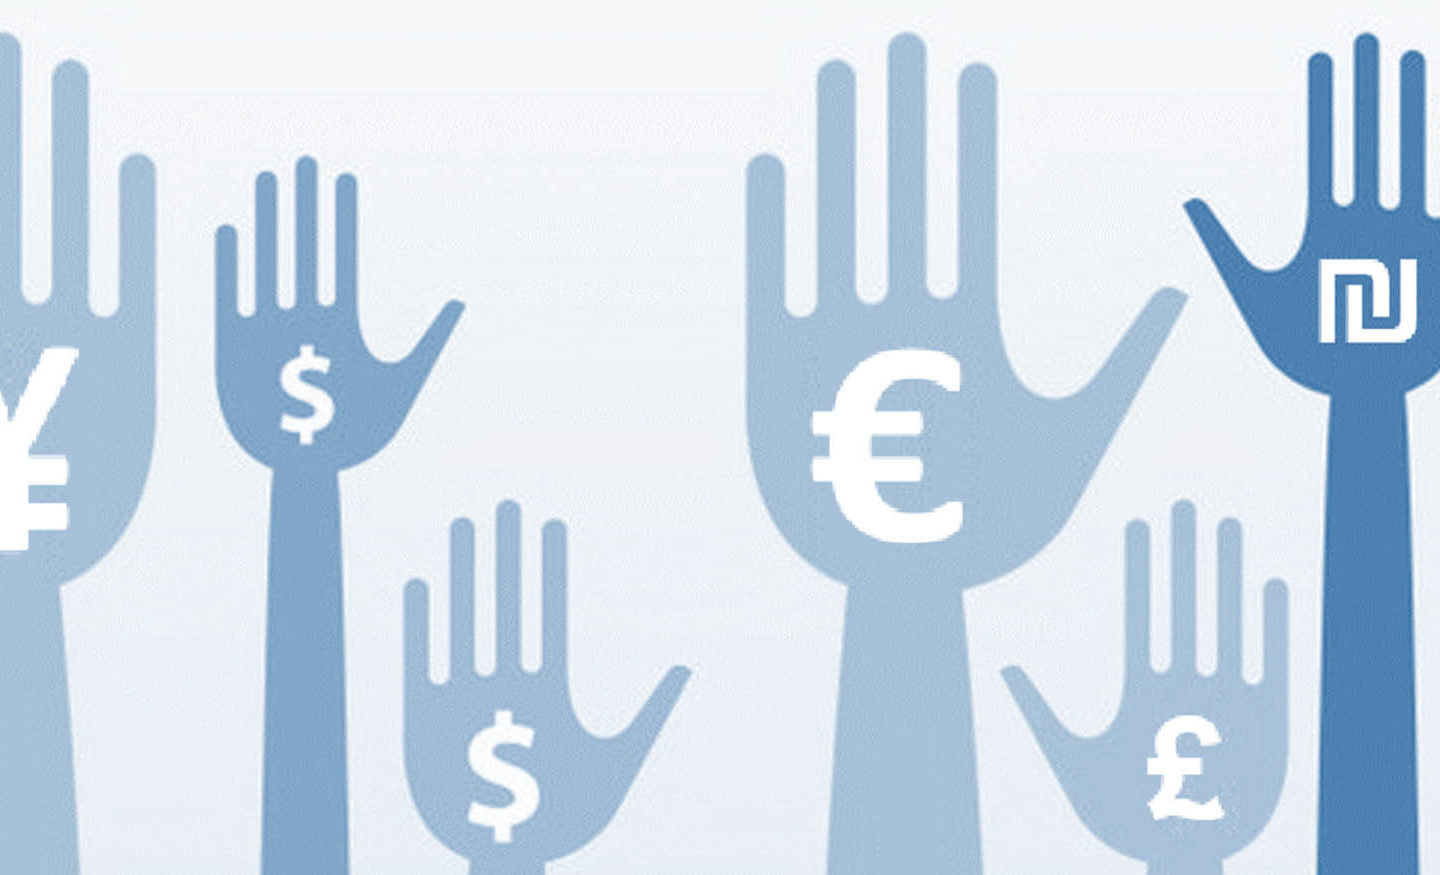 6 ways to create more ethical fundraising stories